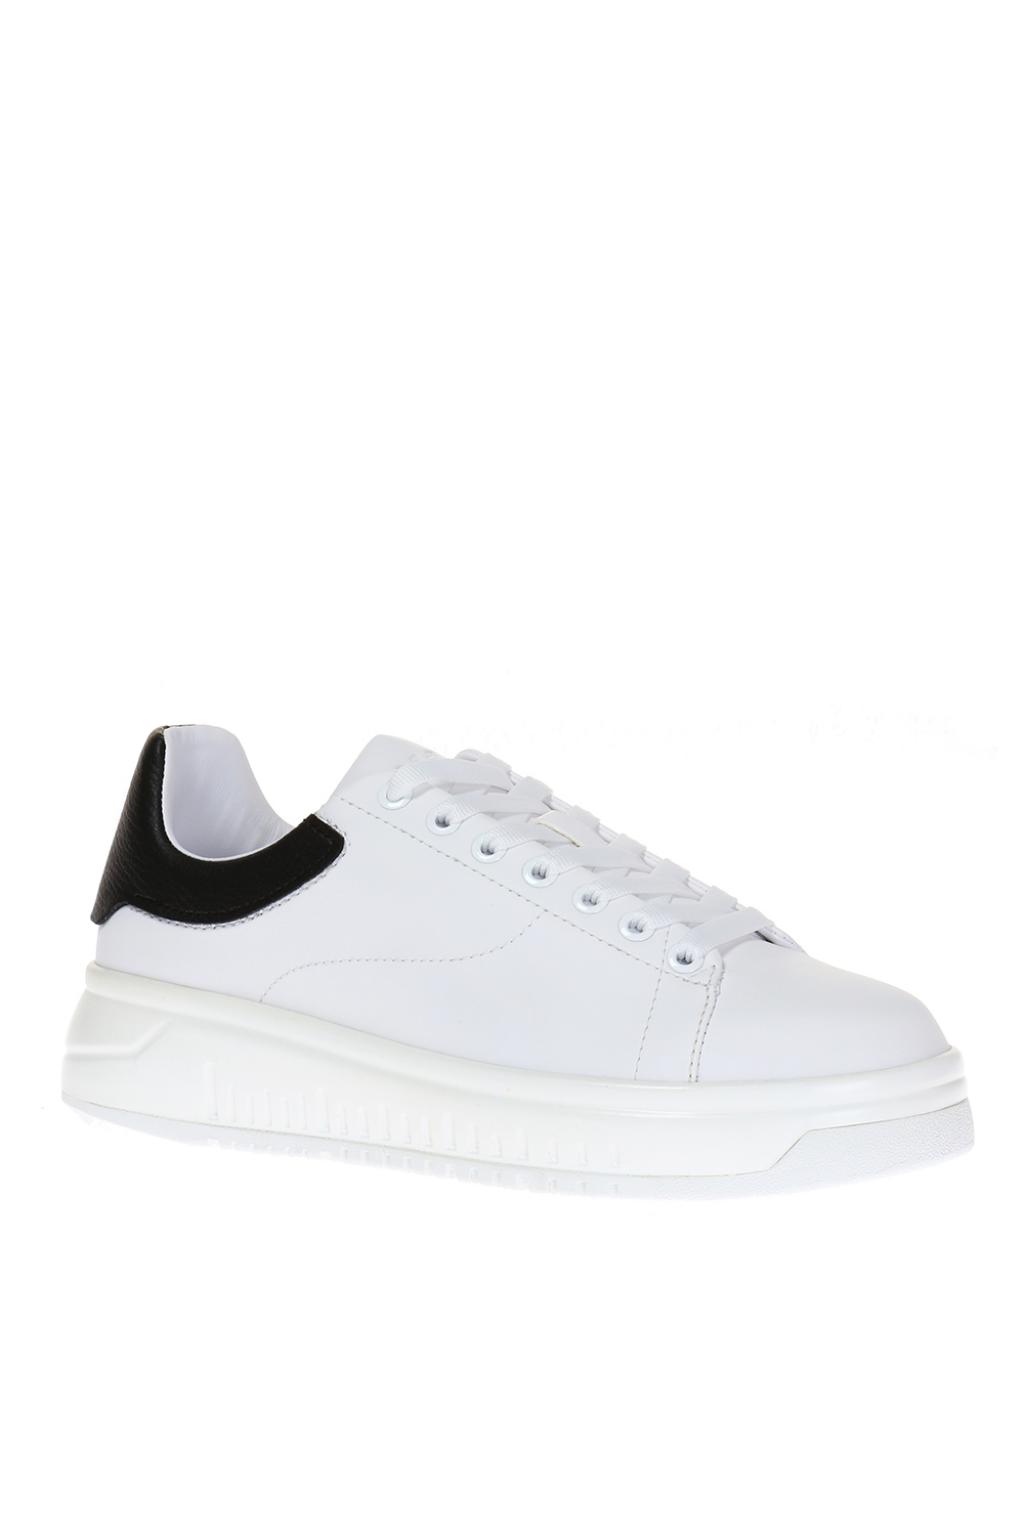 armani lace up sneakers